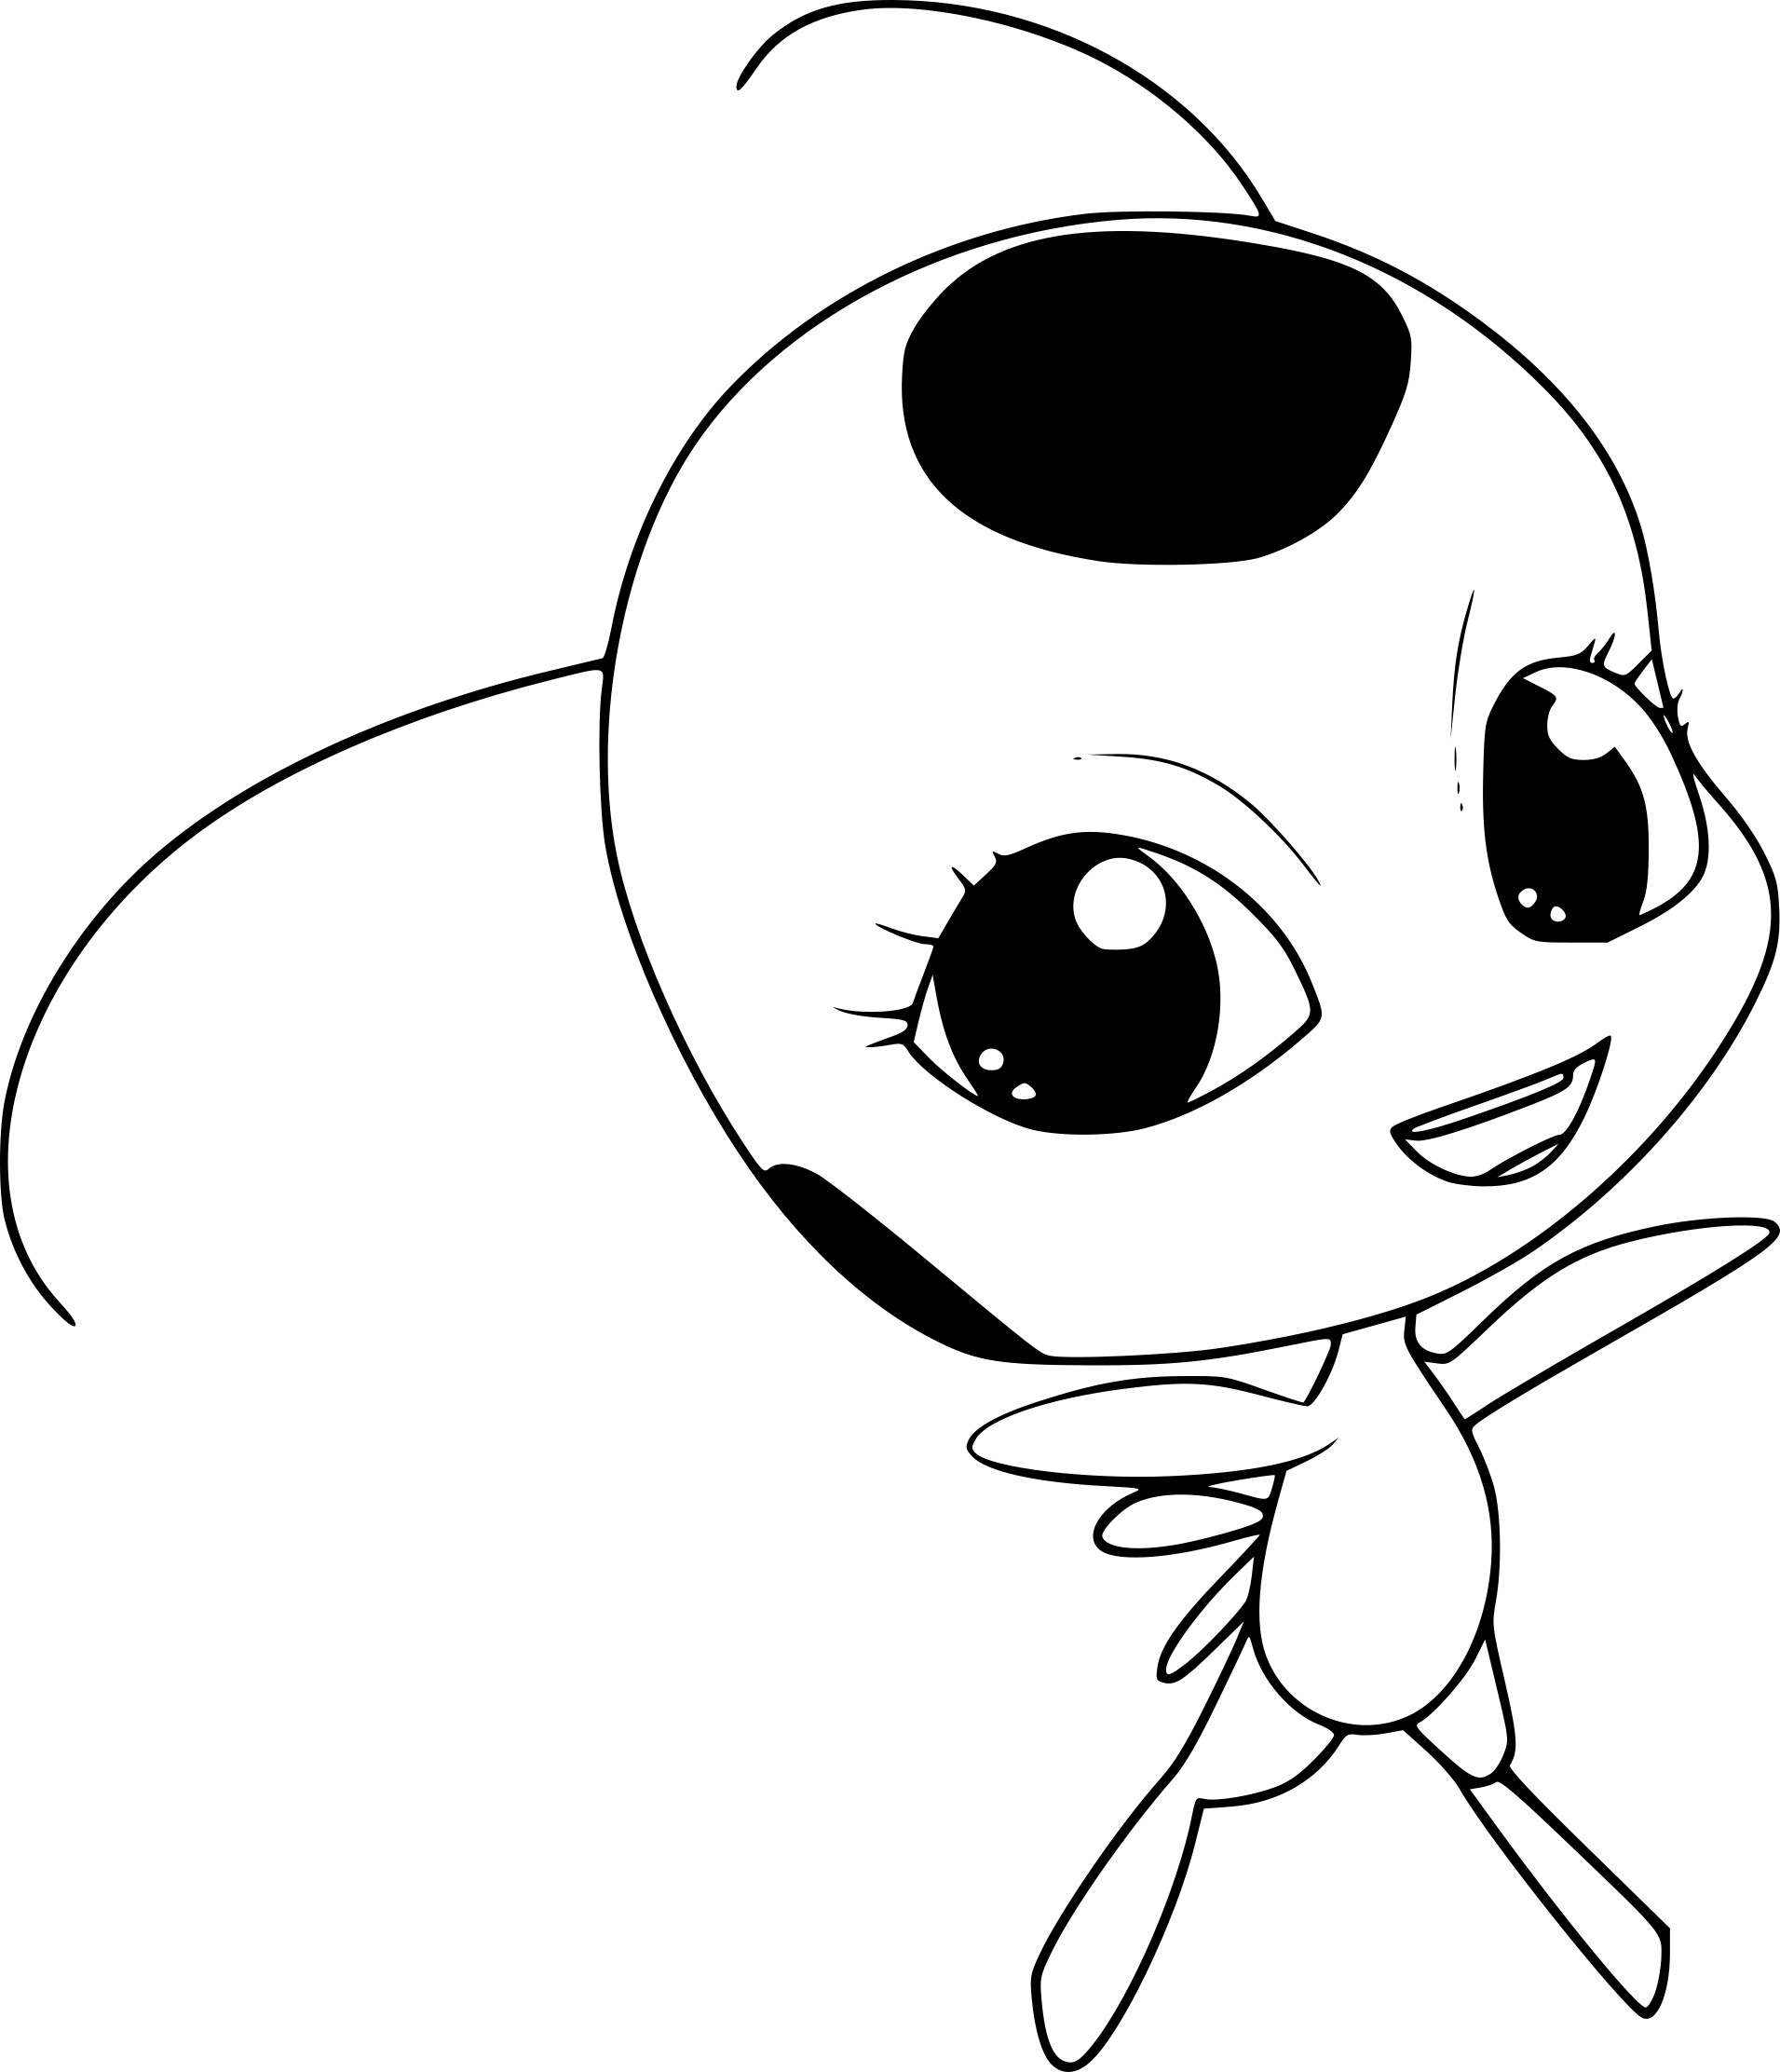 Miraculous Ladybug Coloring Pages 23 Miraculous Ladybug Coloring Pages